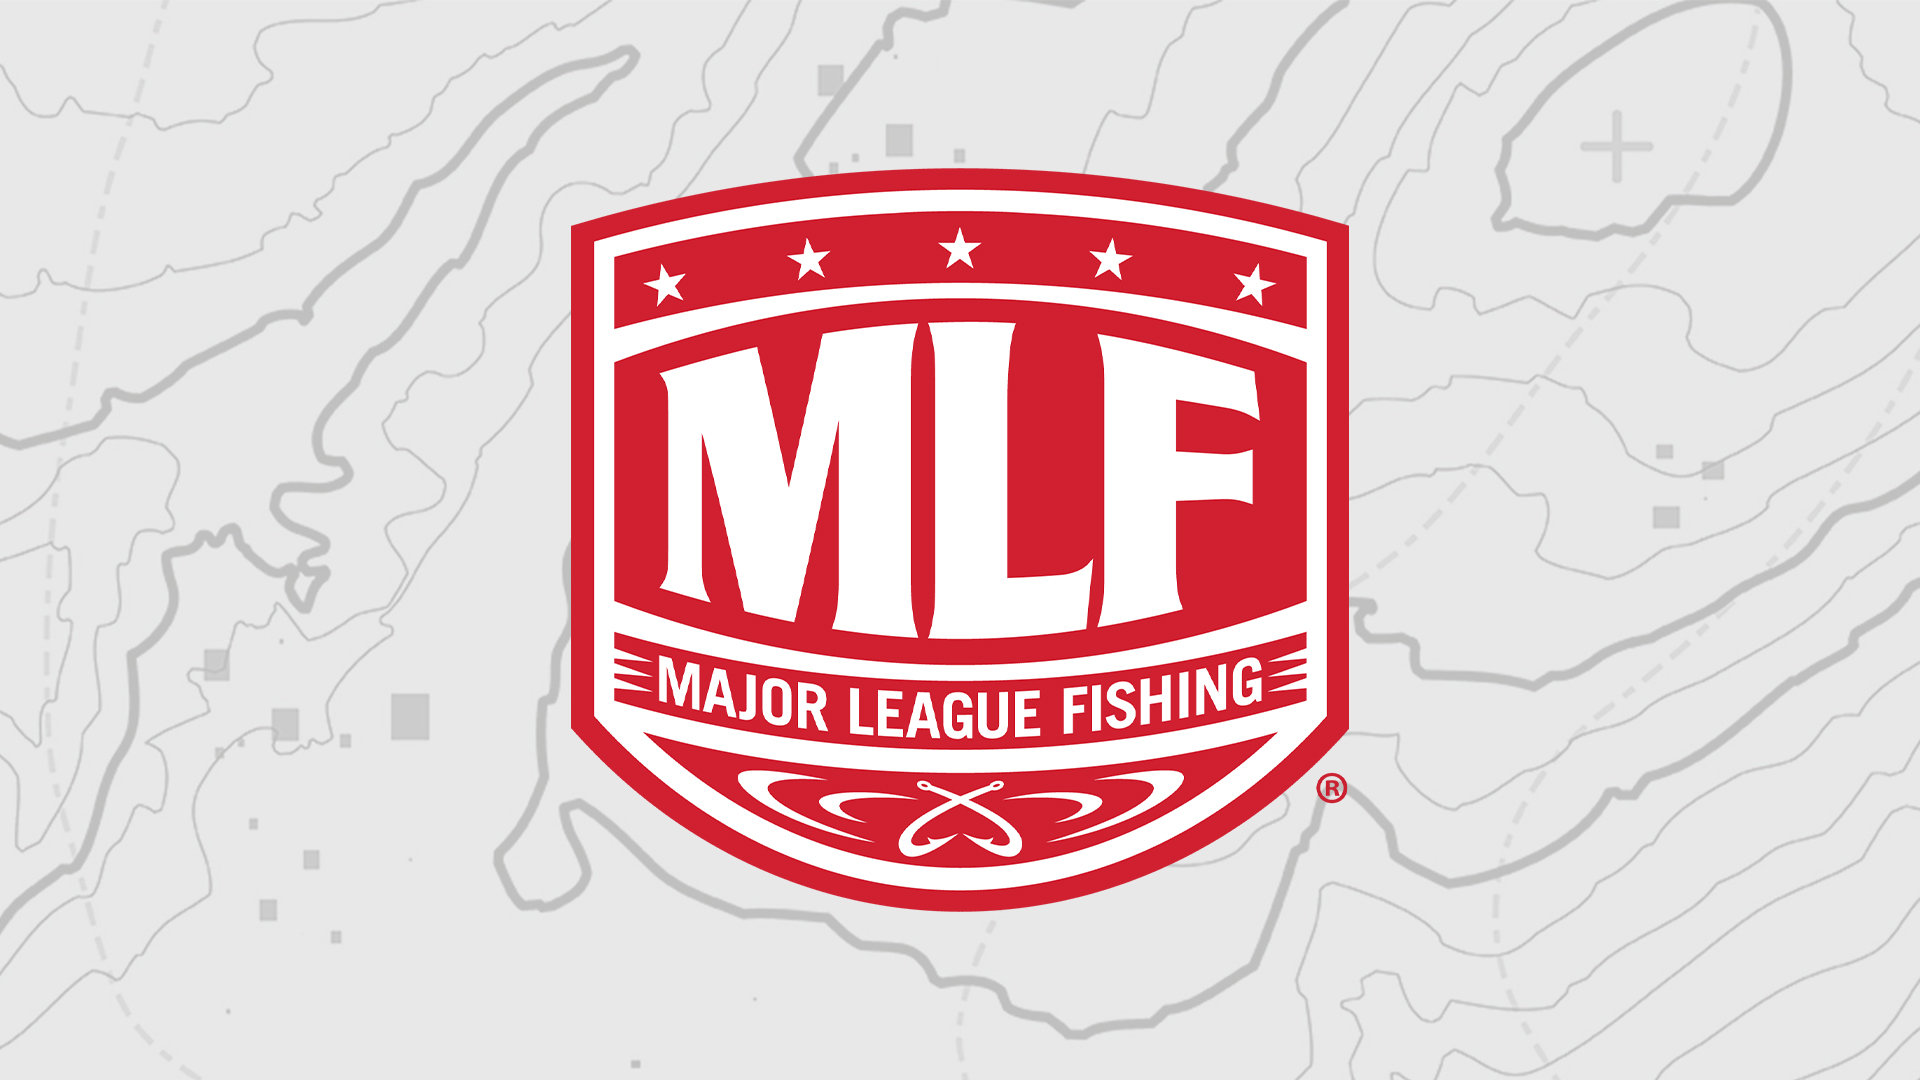 March madness - Major League Fishing